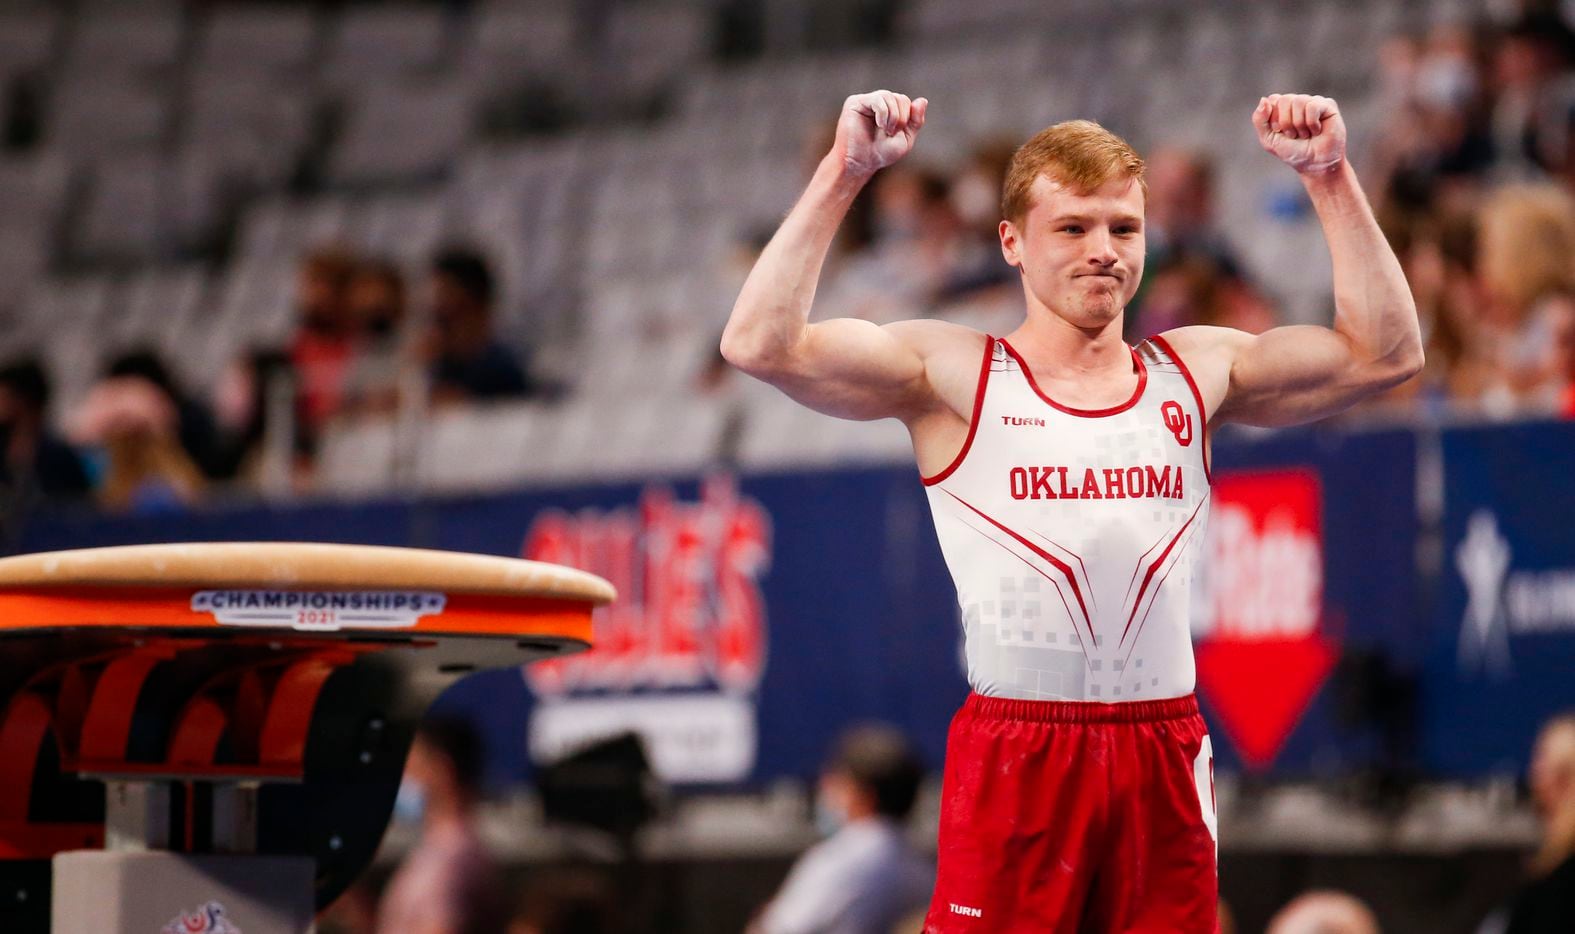 University of Oklahoma's Matt Wenske celebrates after completing the vault during Day 1 of the US gymnastics championships on Thursday, June 3, 2021, at Dickies Arena in Fort Worth. (Juan Figueroa/The Dallas Morning News)